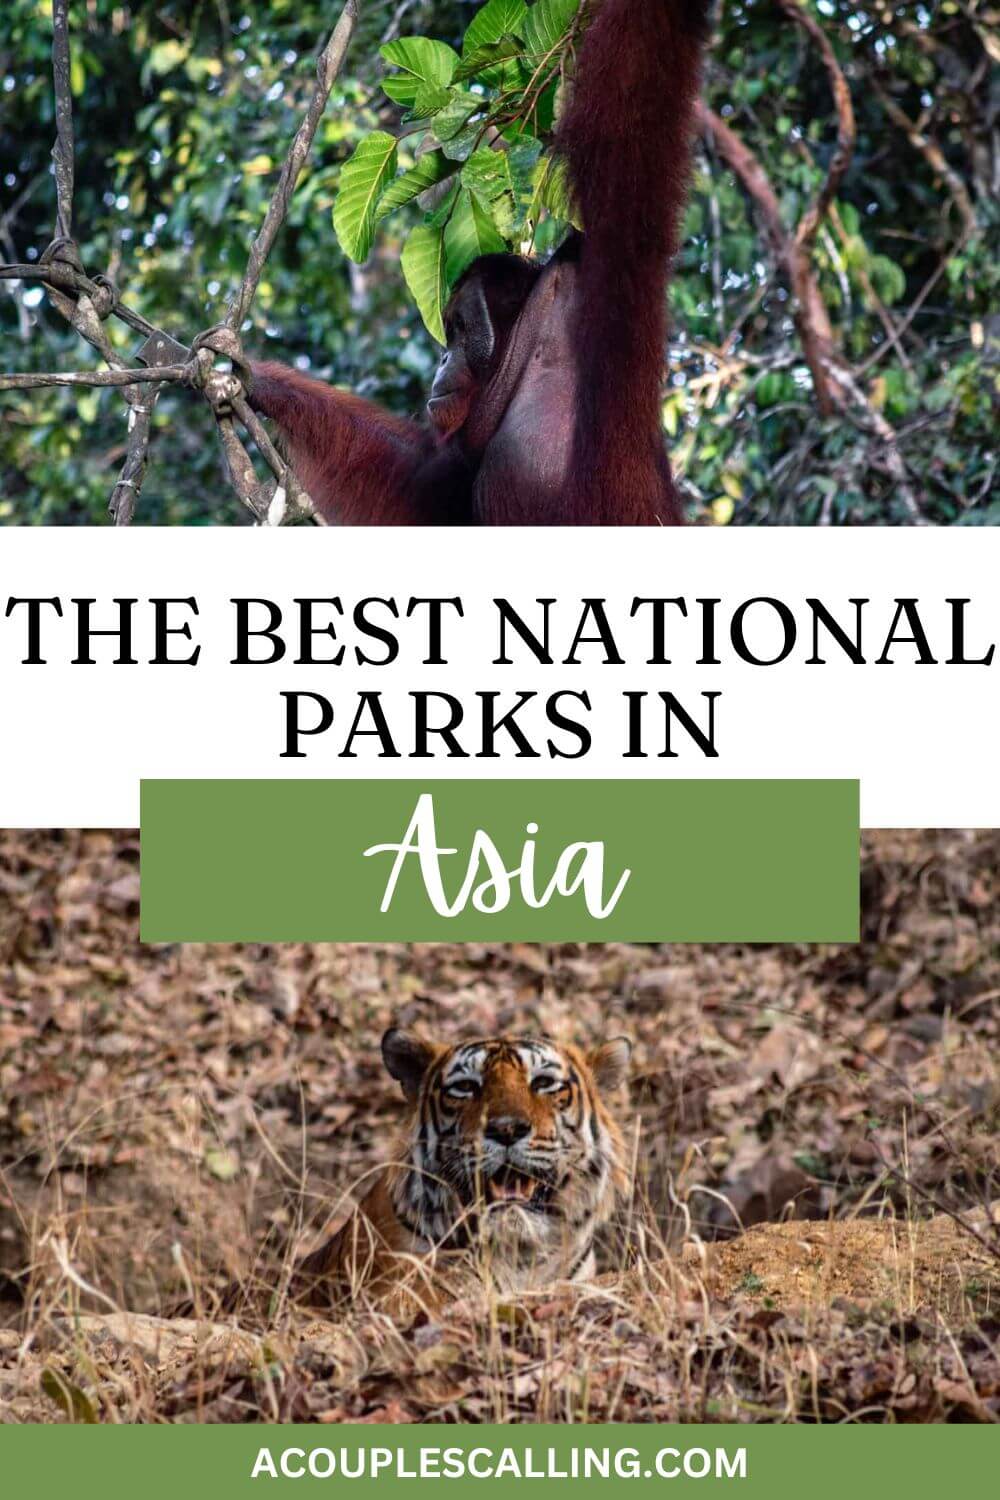 National parks in Asia